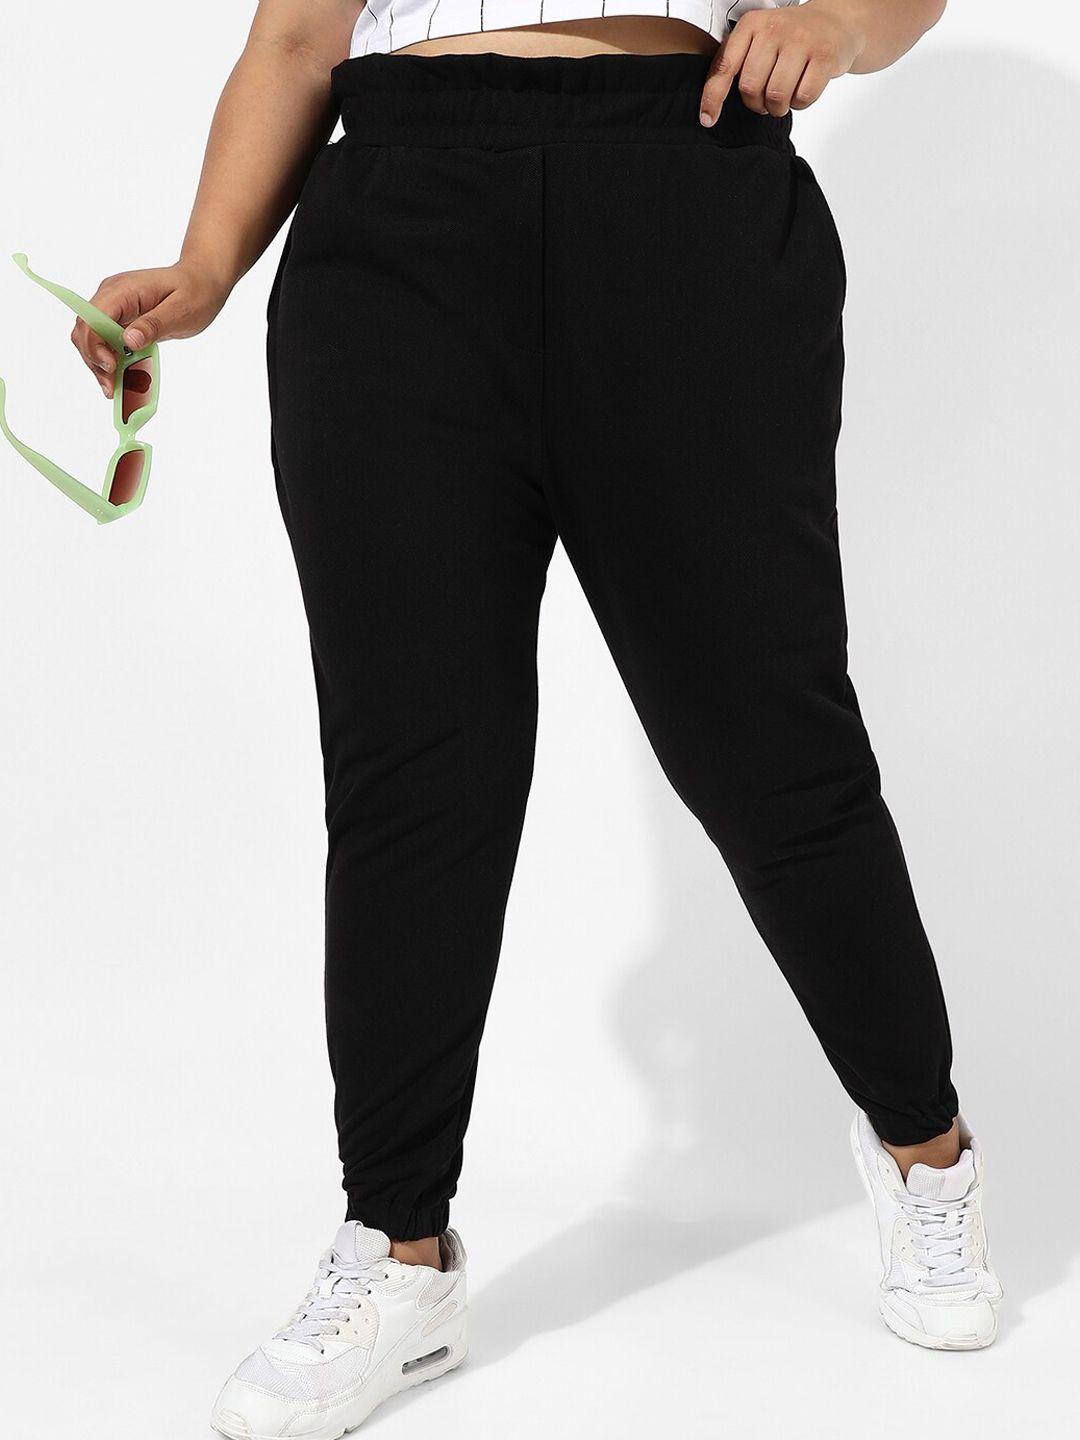 instafab-plus-plus-size-women-mid-rise-relaxed-fit-cotton-joggers